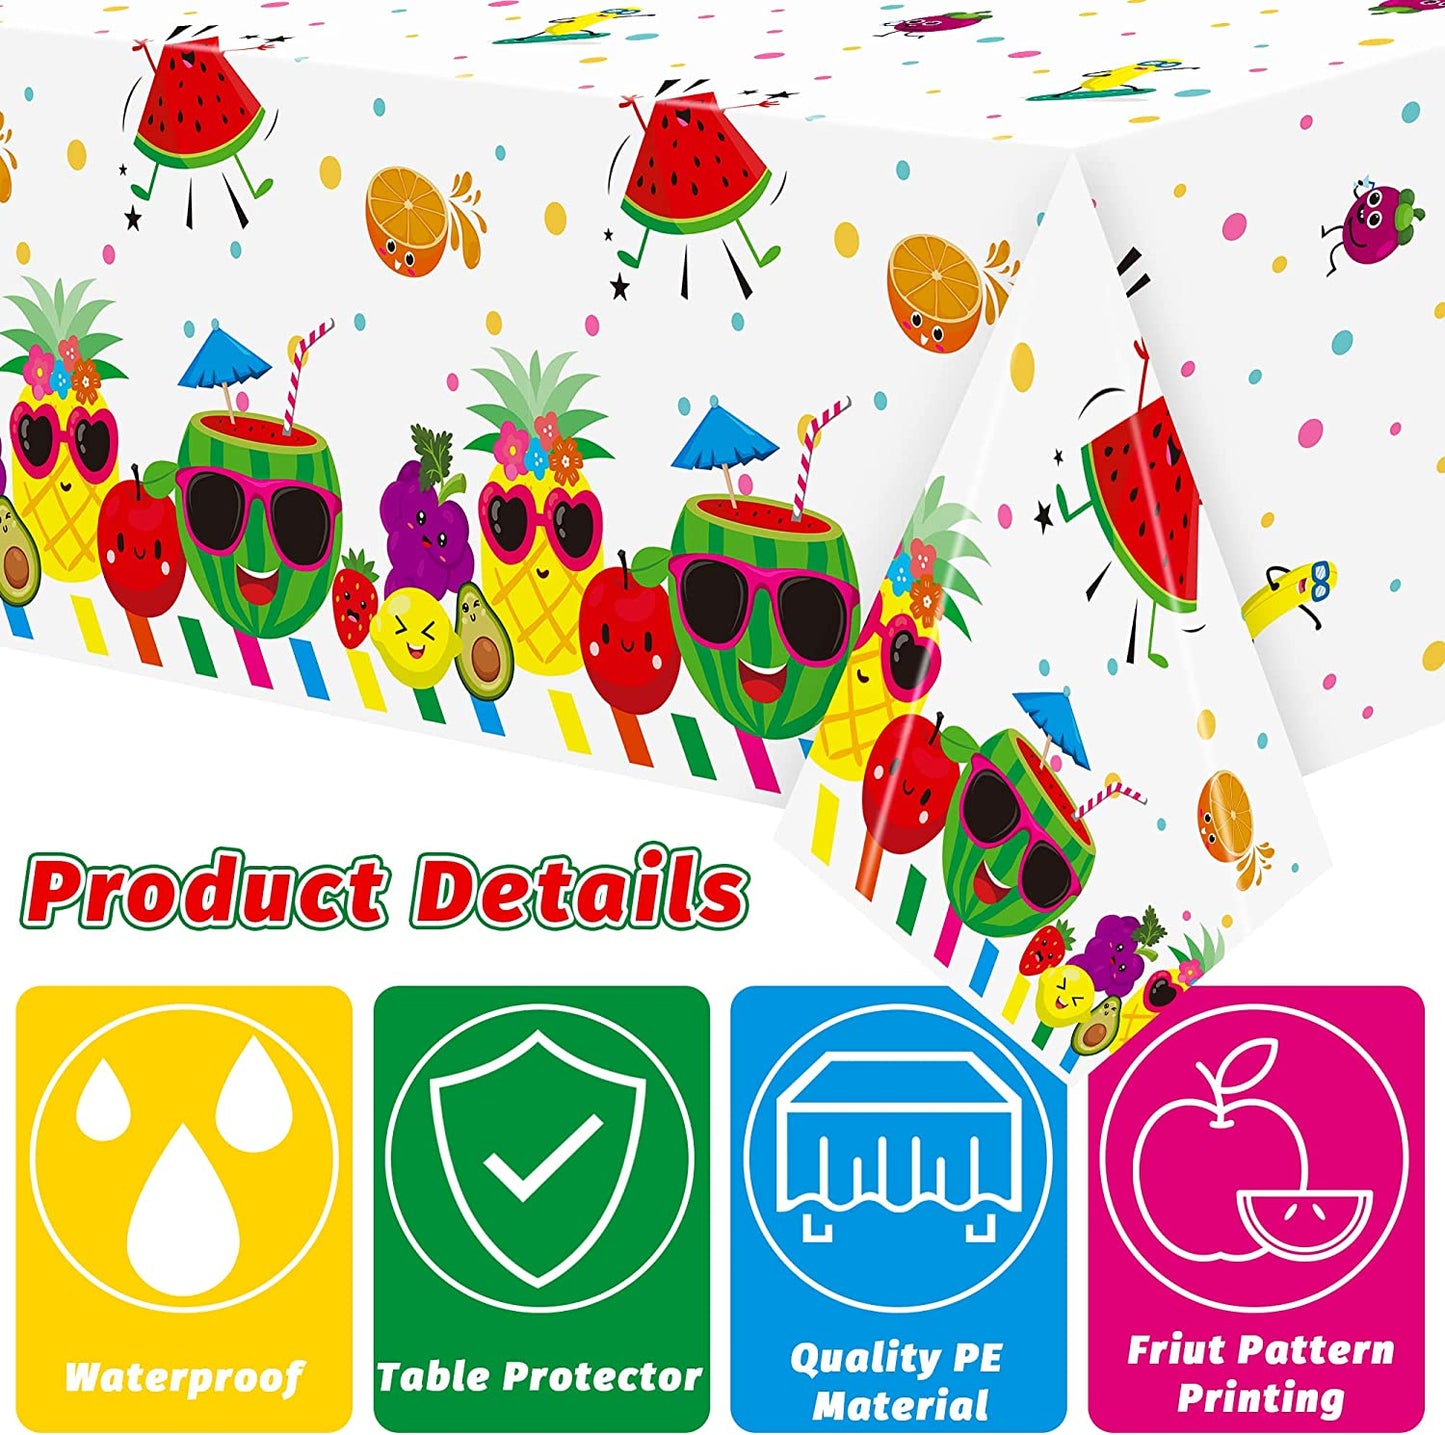 BkeeCten 3 Packs Fruit Theme Table Cover Decorations Watermelon Pineapple Disposable Plastic Tablecloths for Kids Birthday Baby Shower Summer Fruit Hawaii Party Decorations Supplies, 54x108 inch